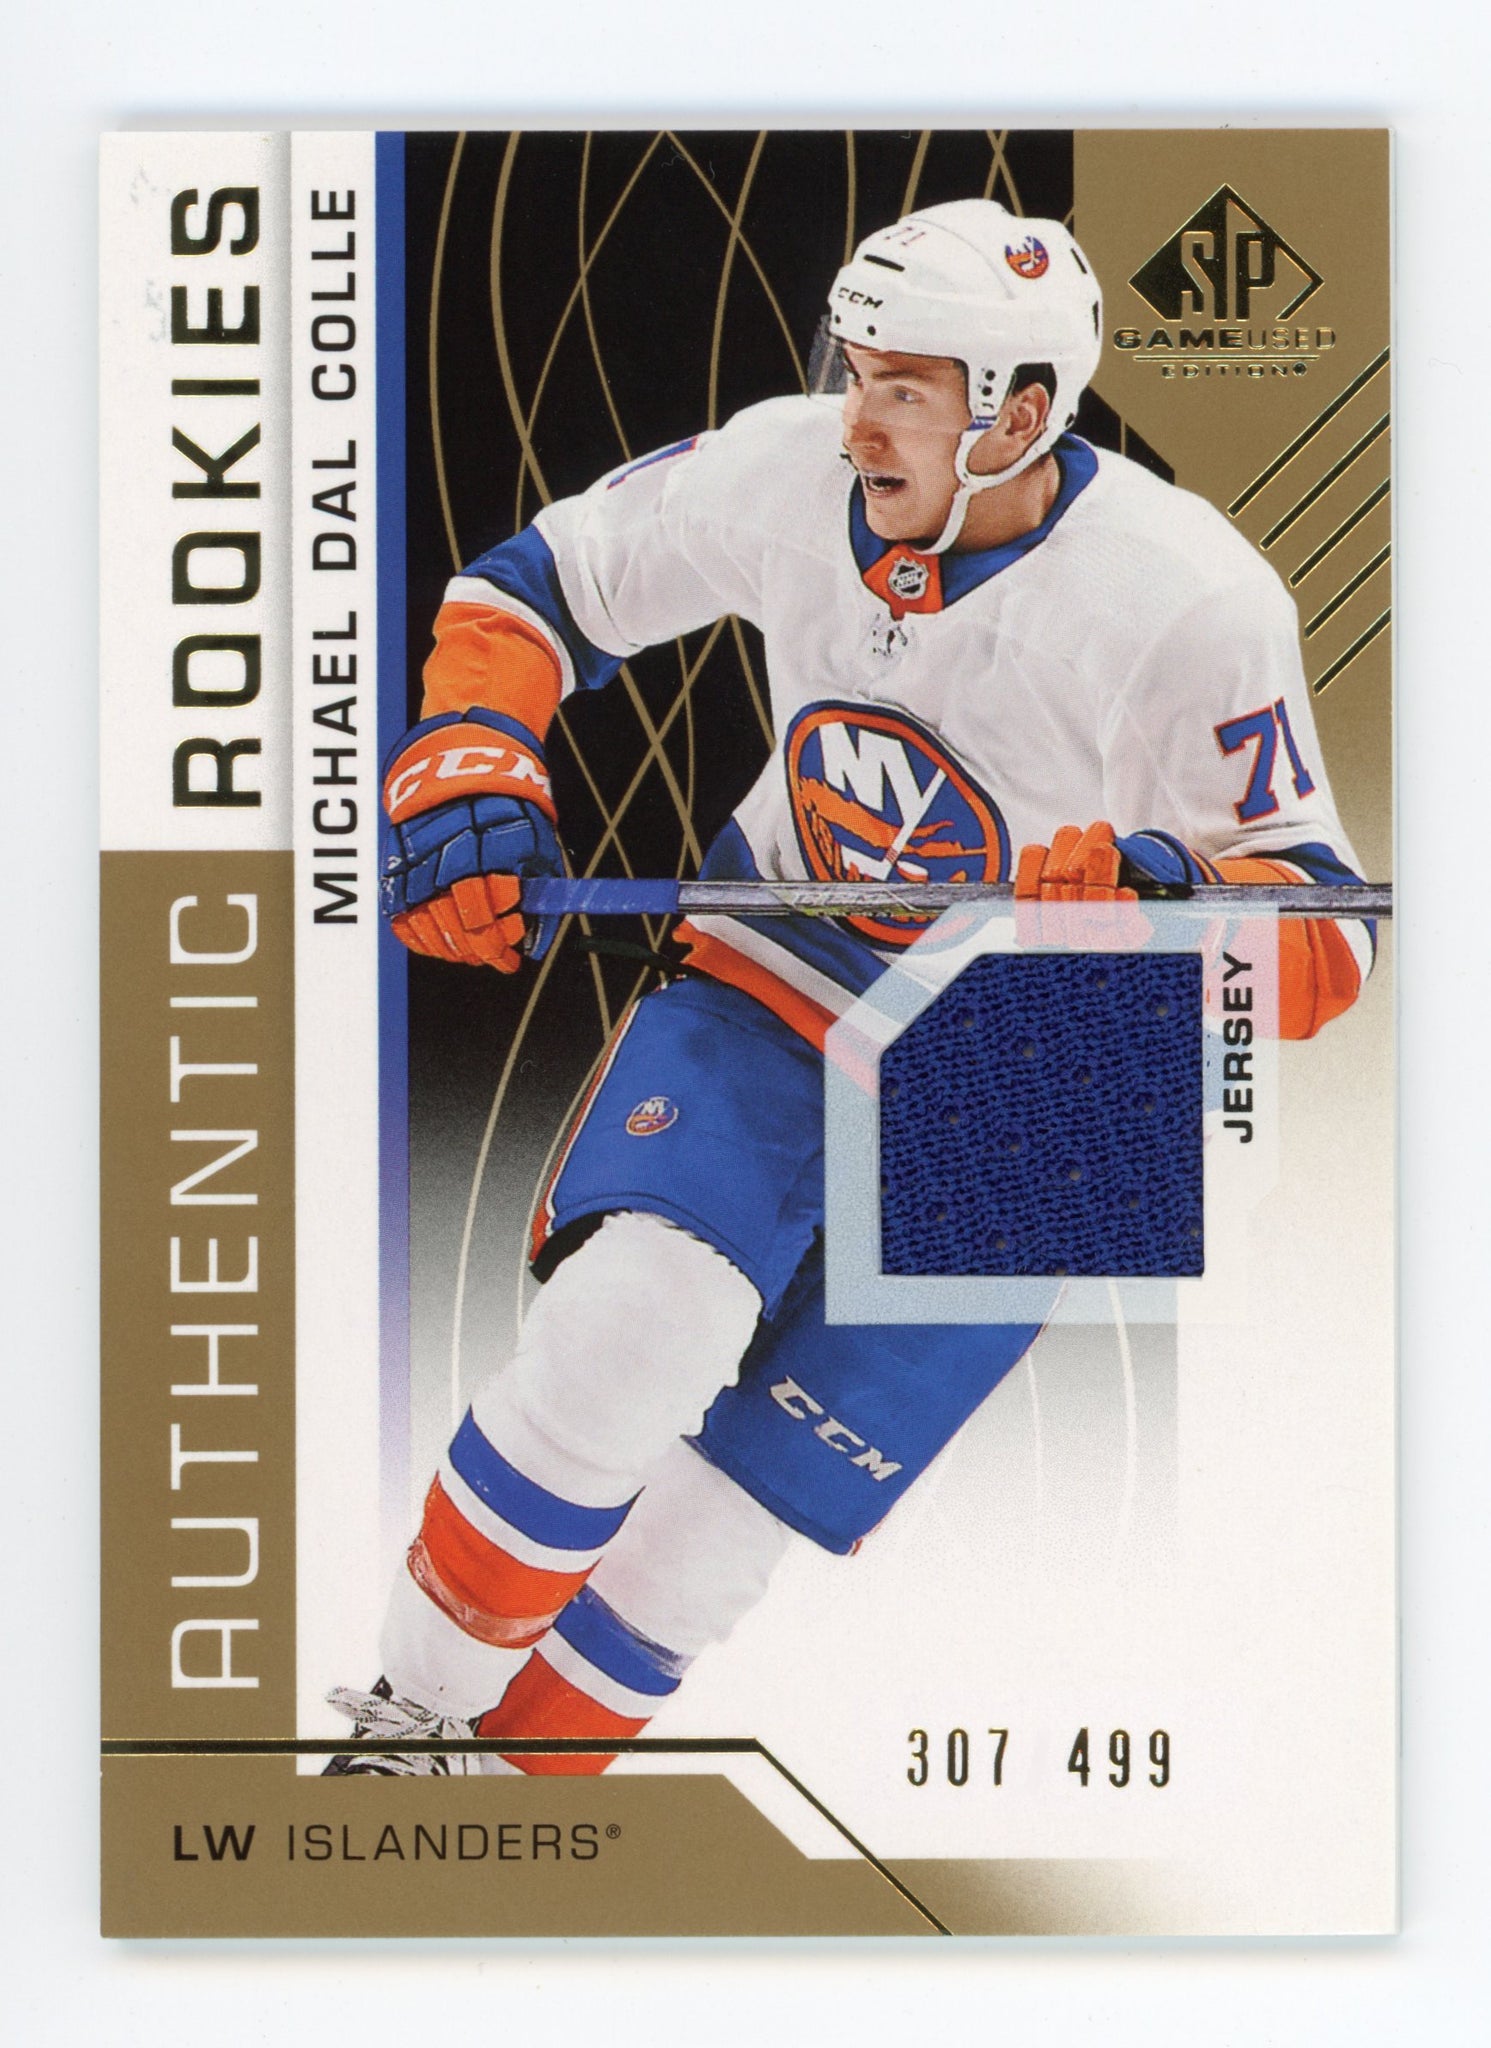 2018-2019 Michael Dal Colle Rookie #d /499 SP Game Used New York Islanders #188